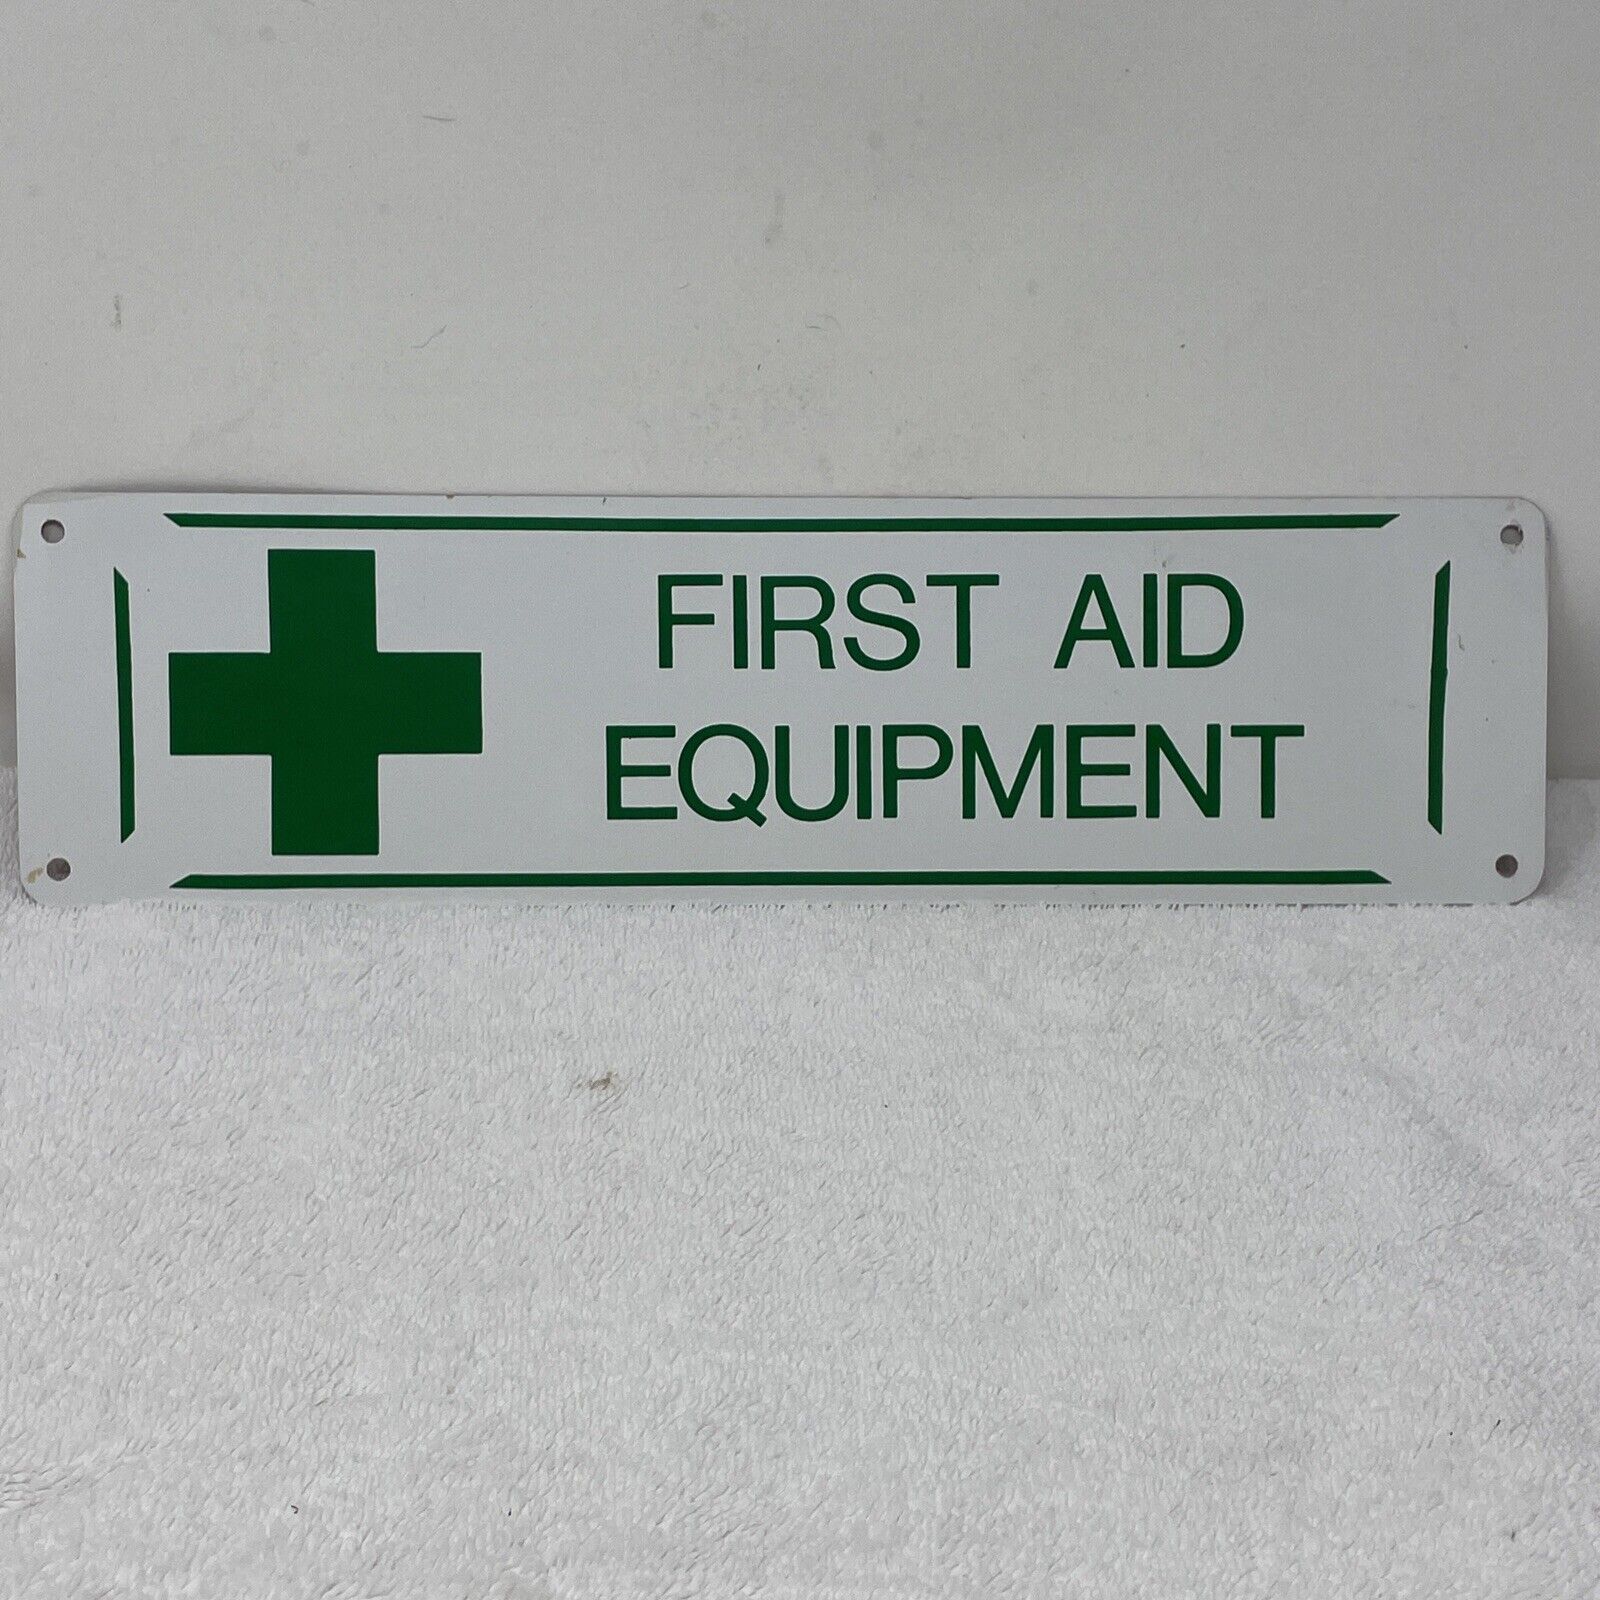 Vintage Metal FIRST AID EQUIPMENT sign 14”x3.75” Green/white